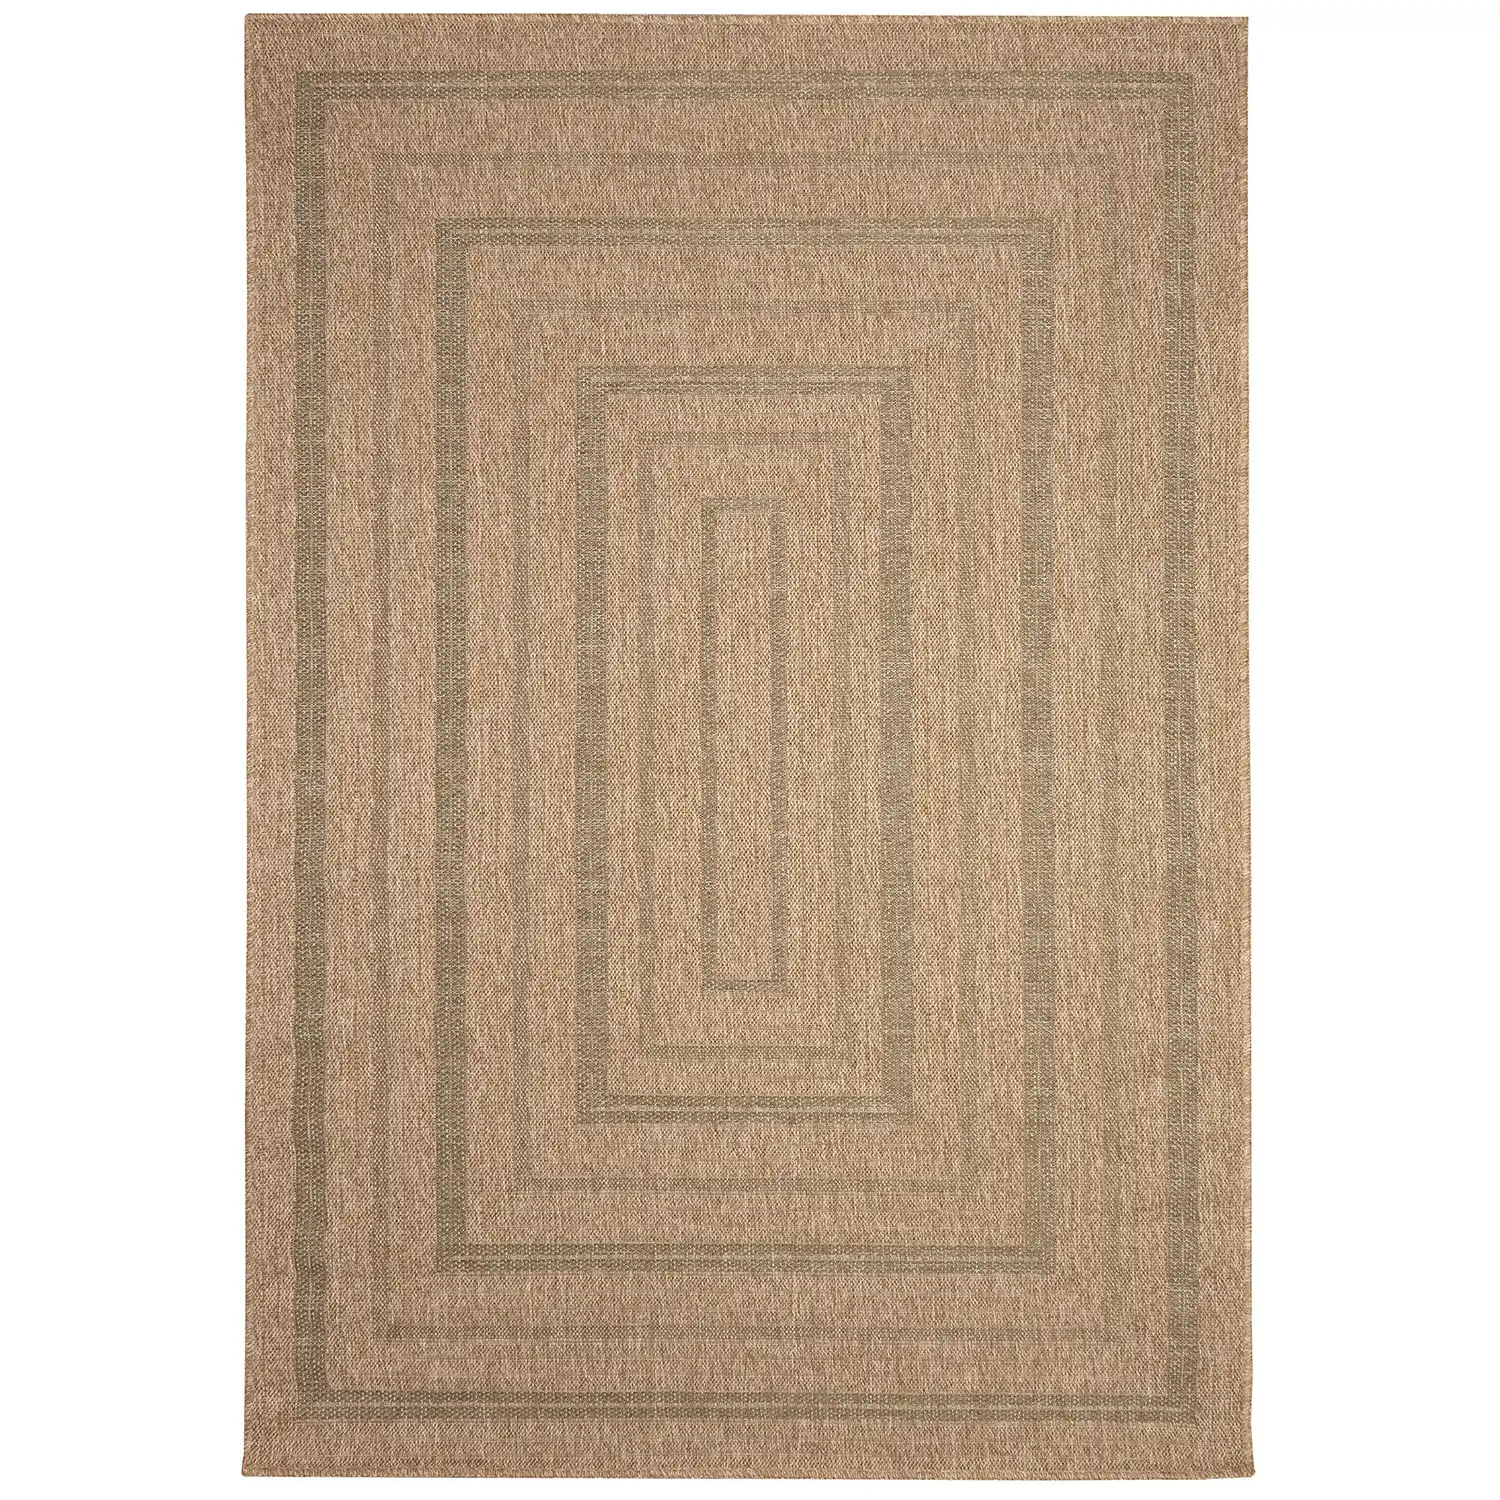 Liora Manne Sahara Low Profile  Easy Care Woven Weather Resistant Rug- Multi Border Green  Product Image